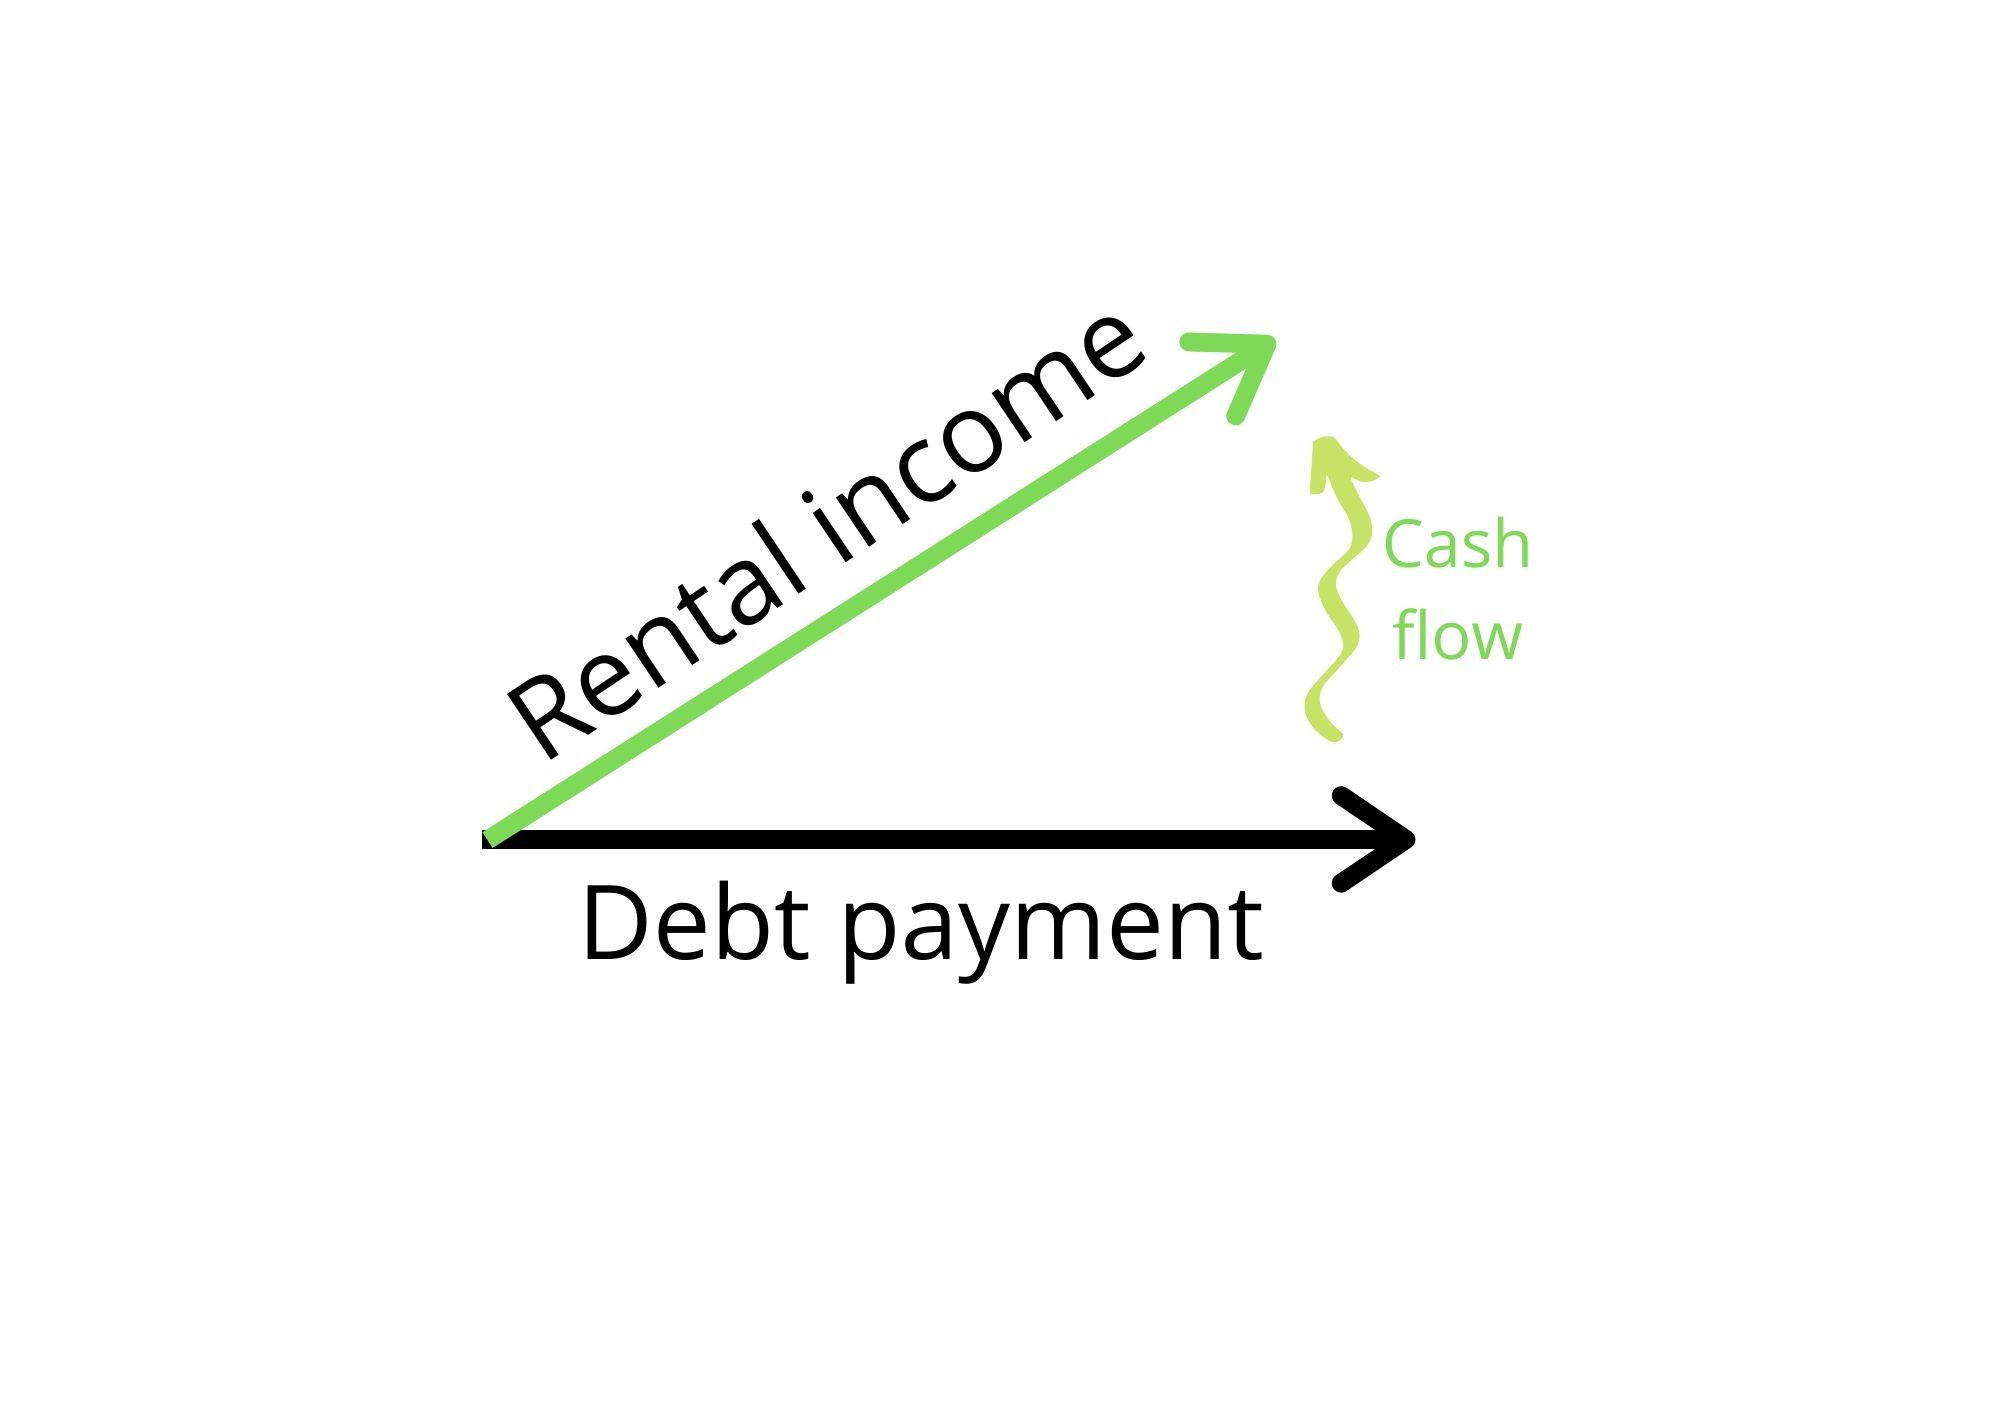 cashflow is the result of rental income exceeding your debt payment